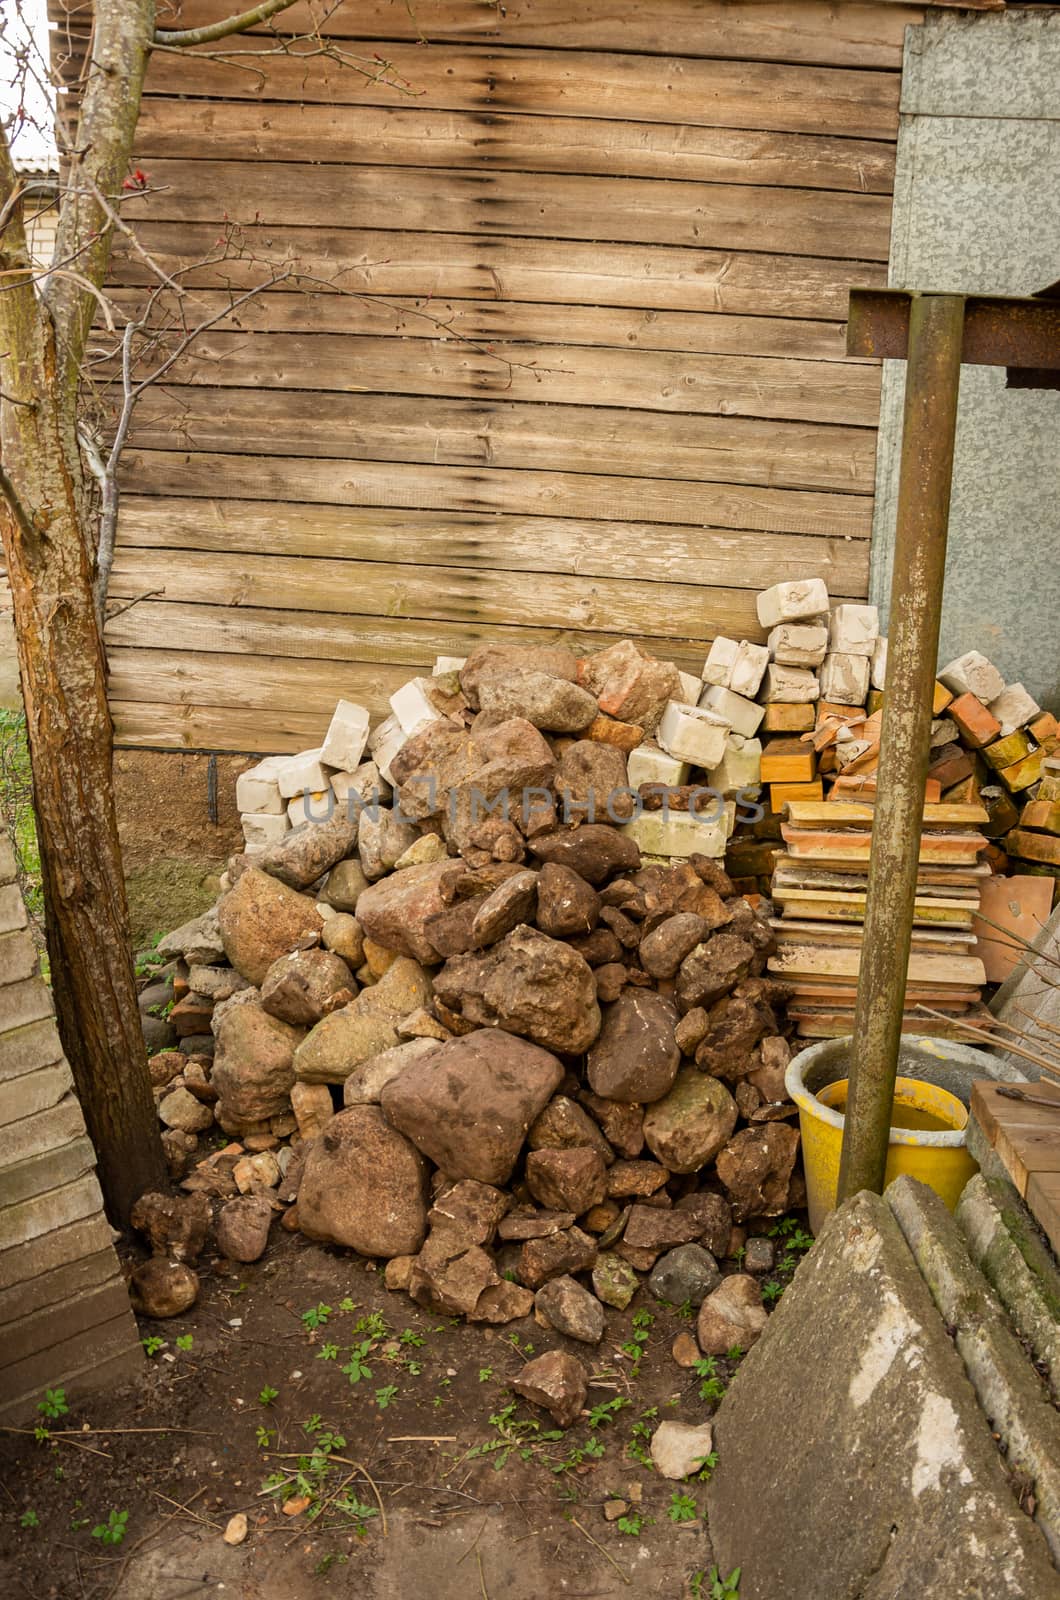 Stack of stones, various garden things, buckets